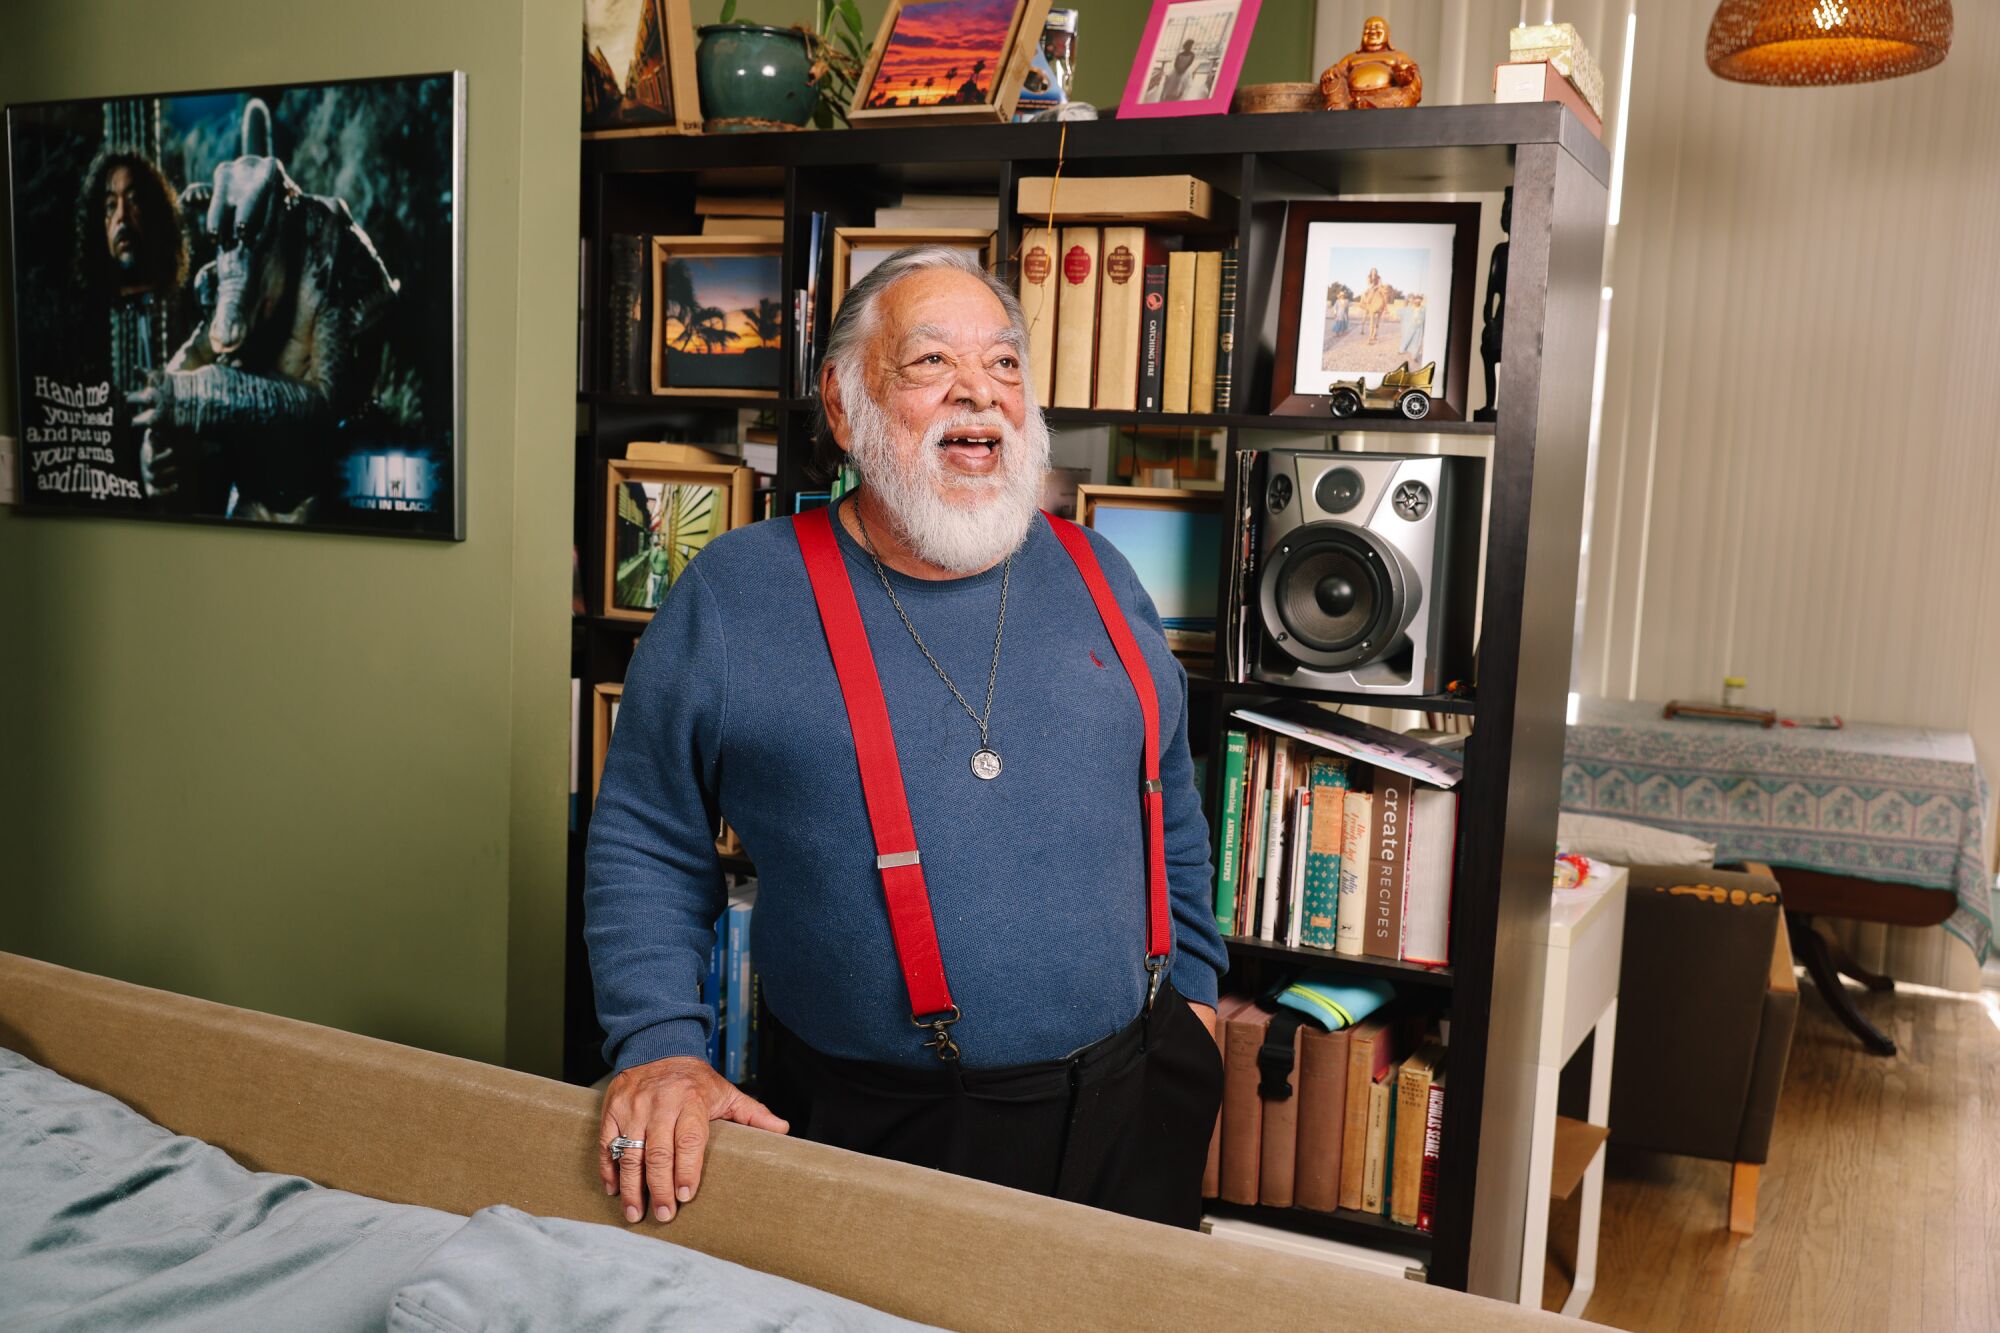 A man smiles while standing in his living room.